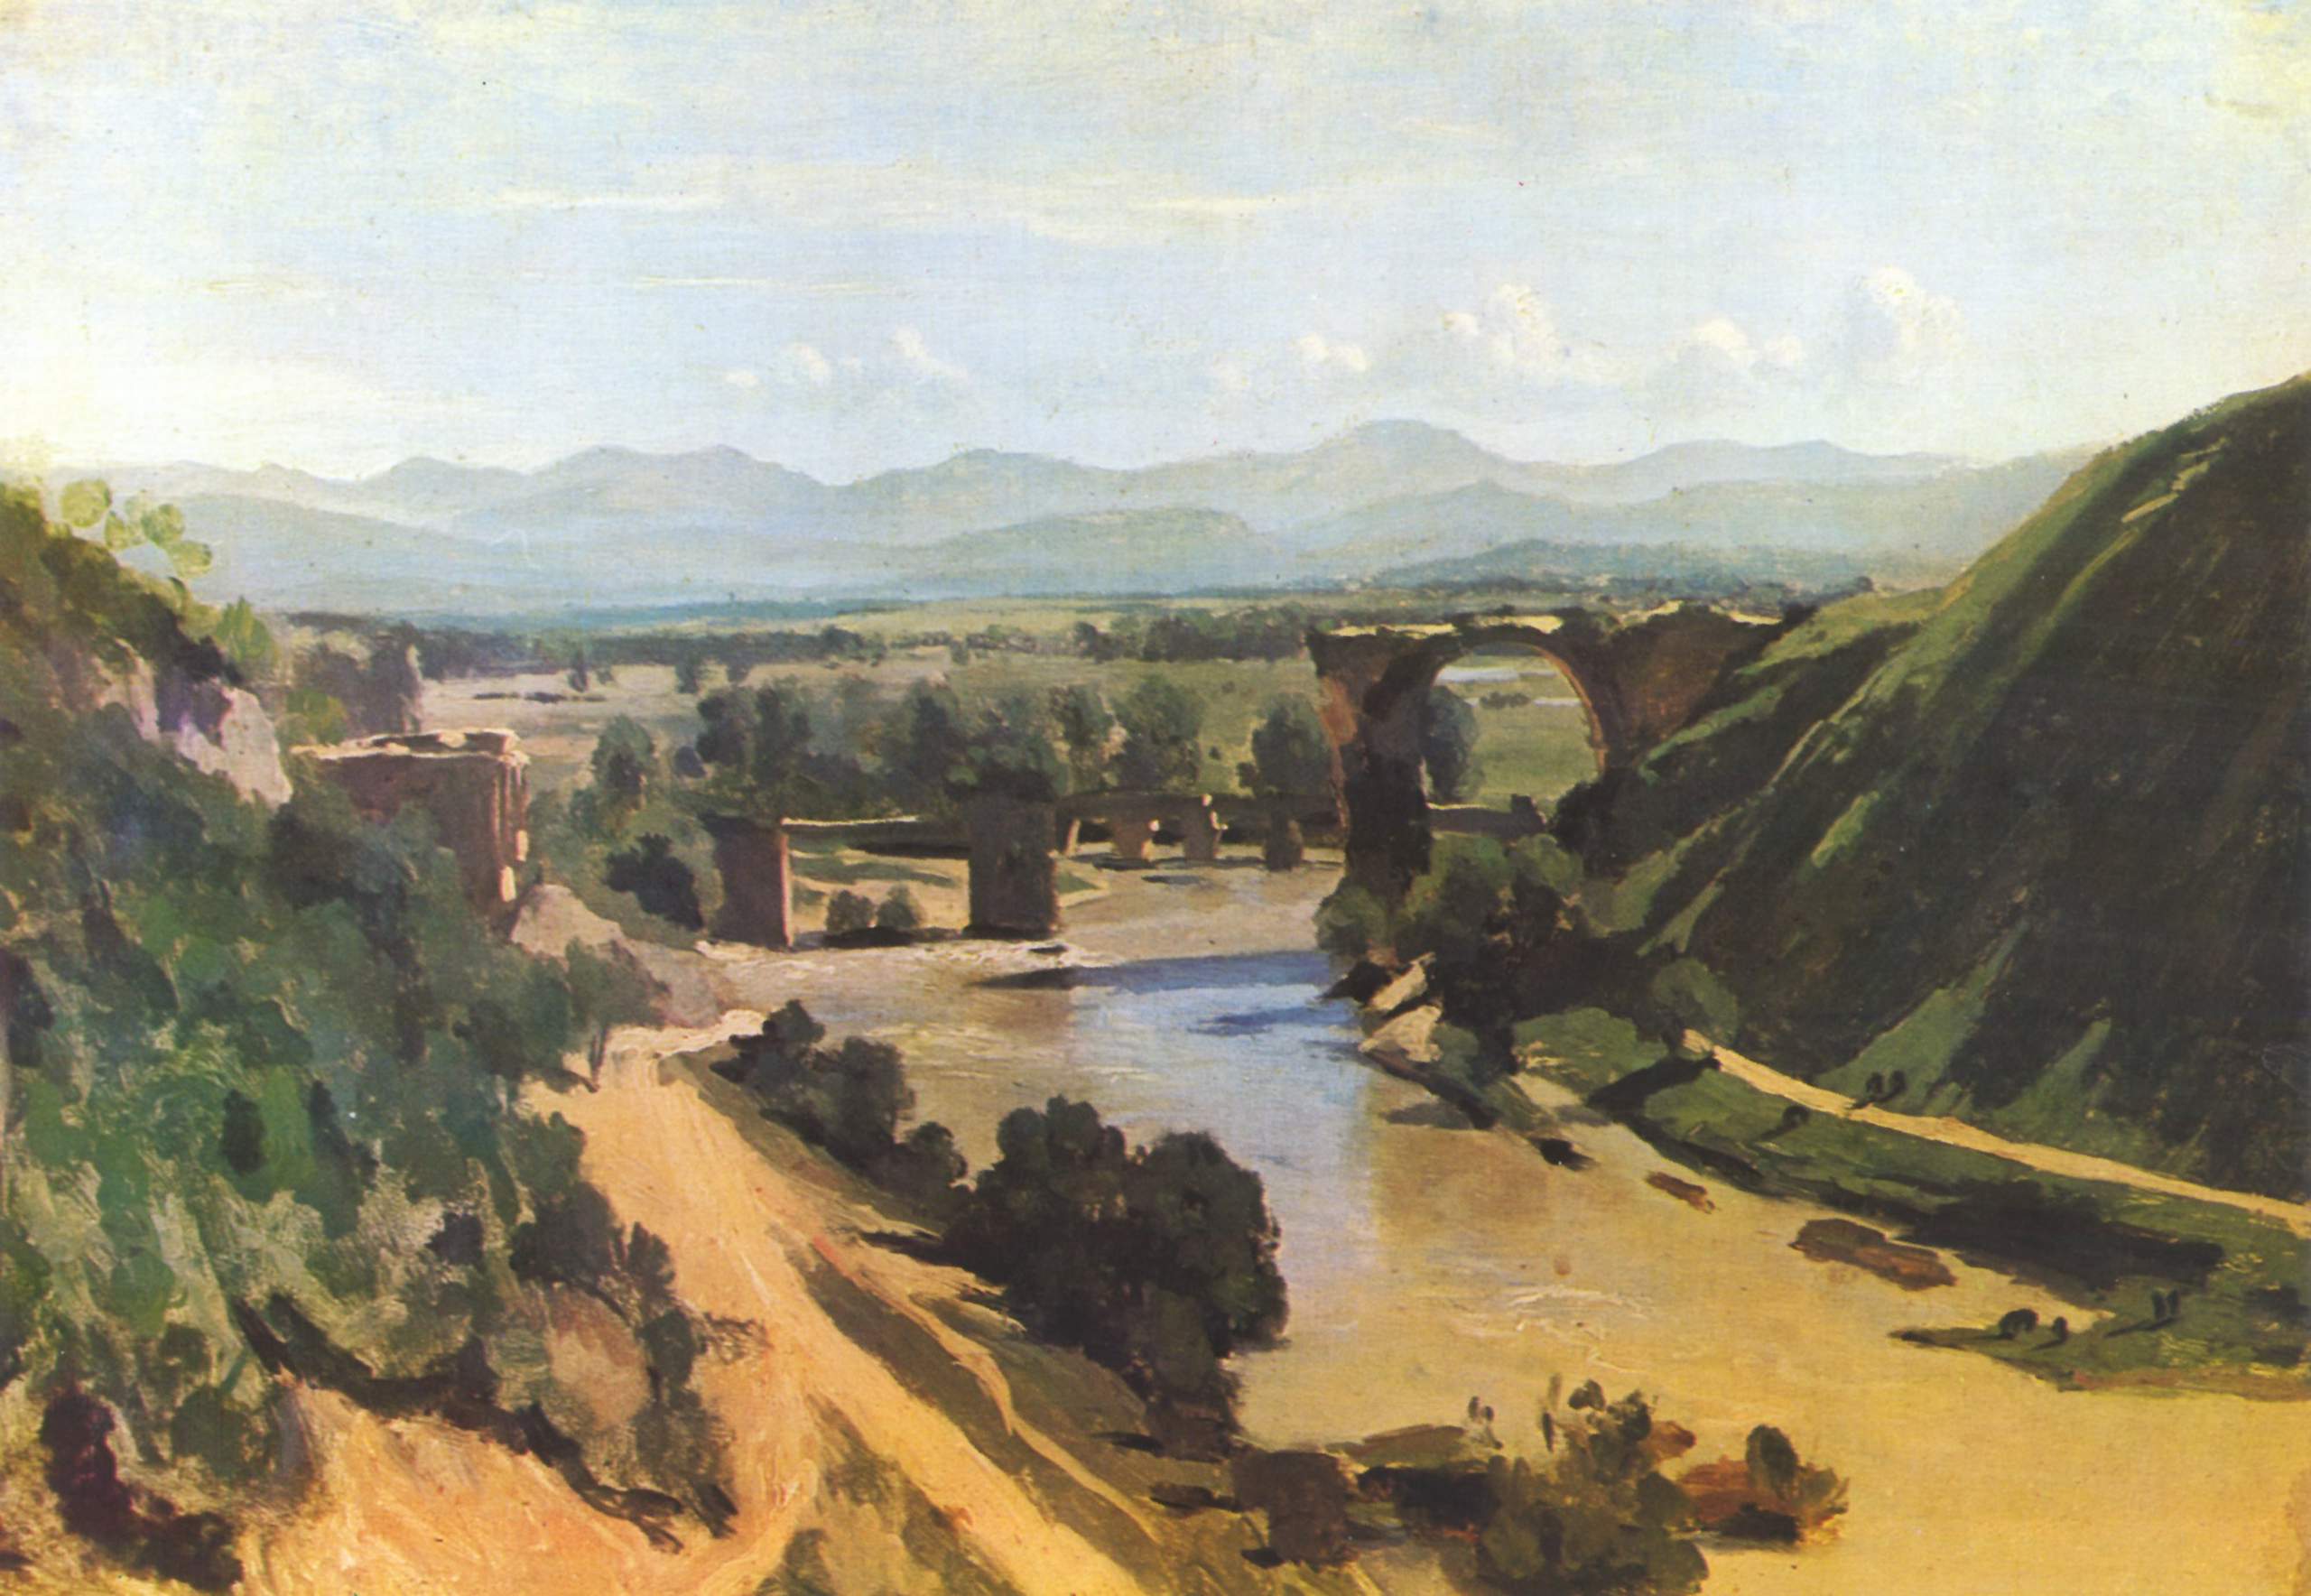 Camille Corot, The Bridge at Narni, 1826, oil on paper mounted on canvas, 34 x 48 cm (Musée du Louvre)